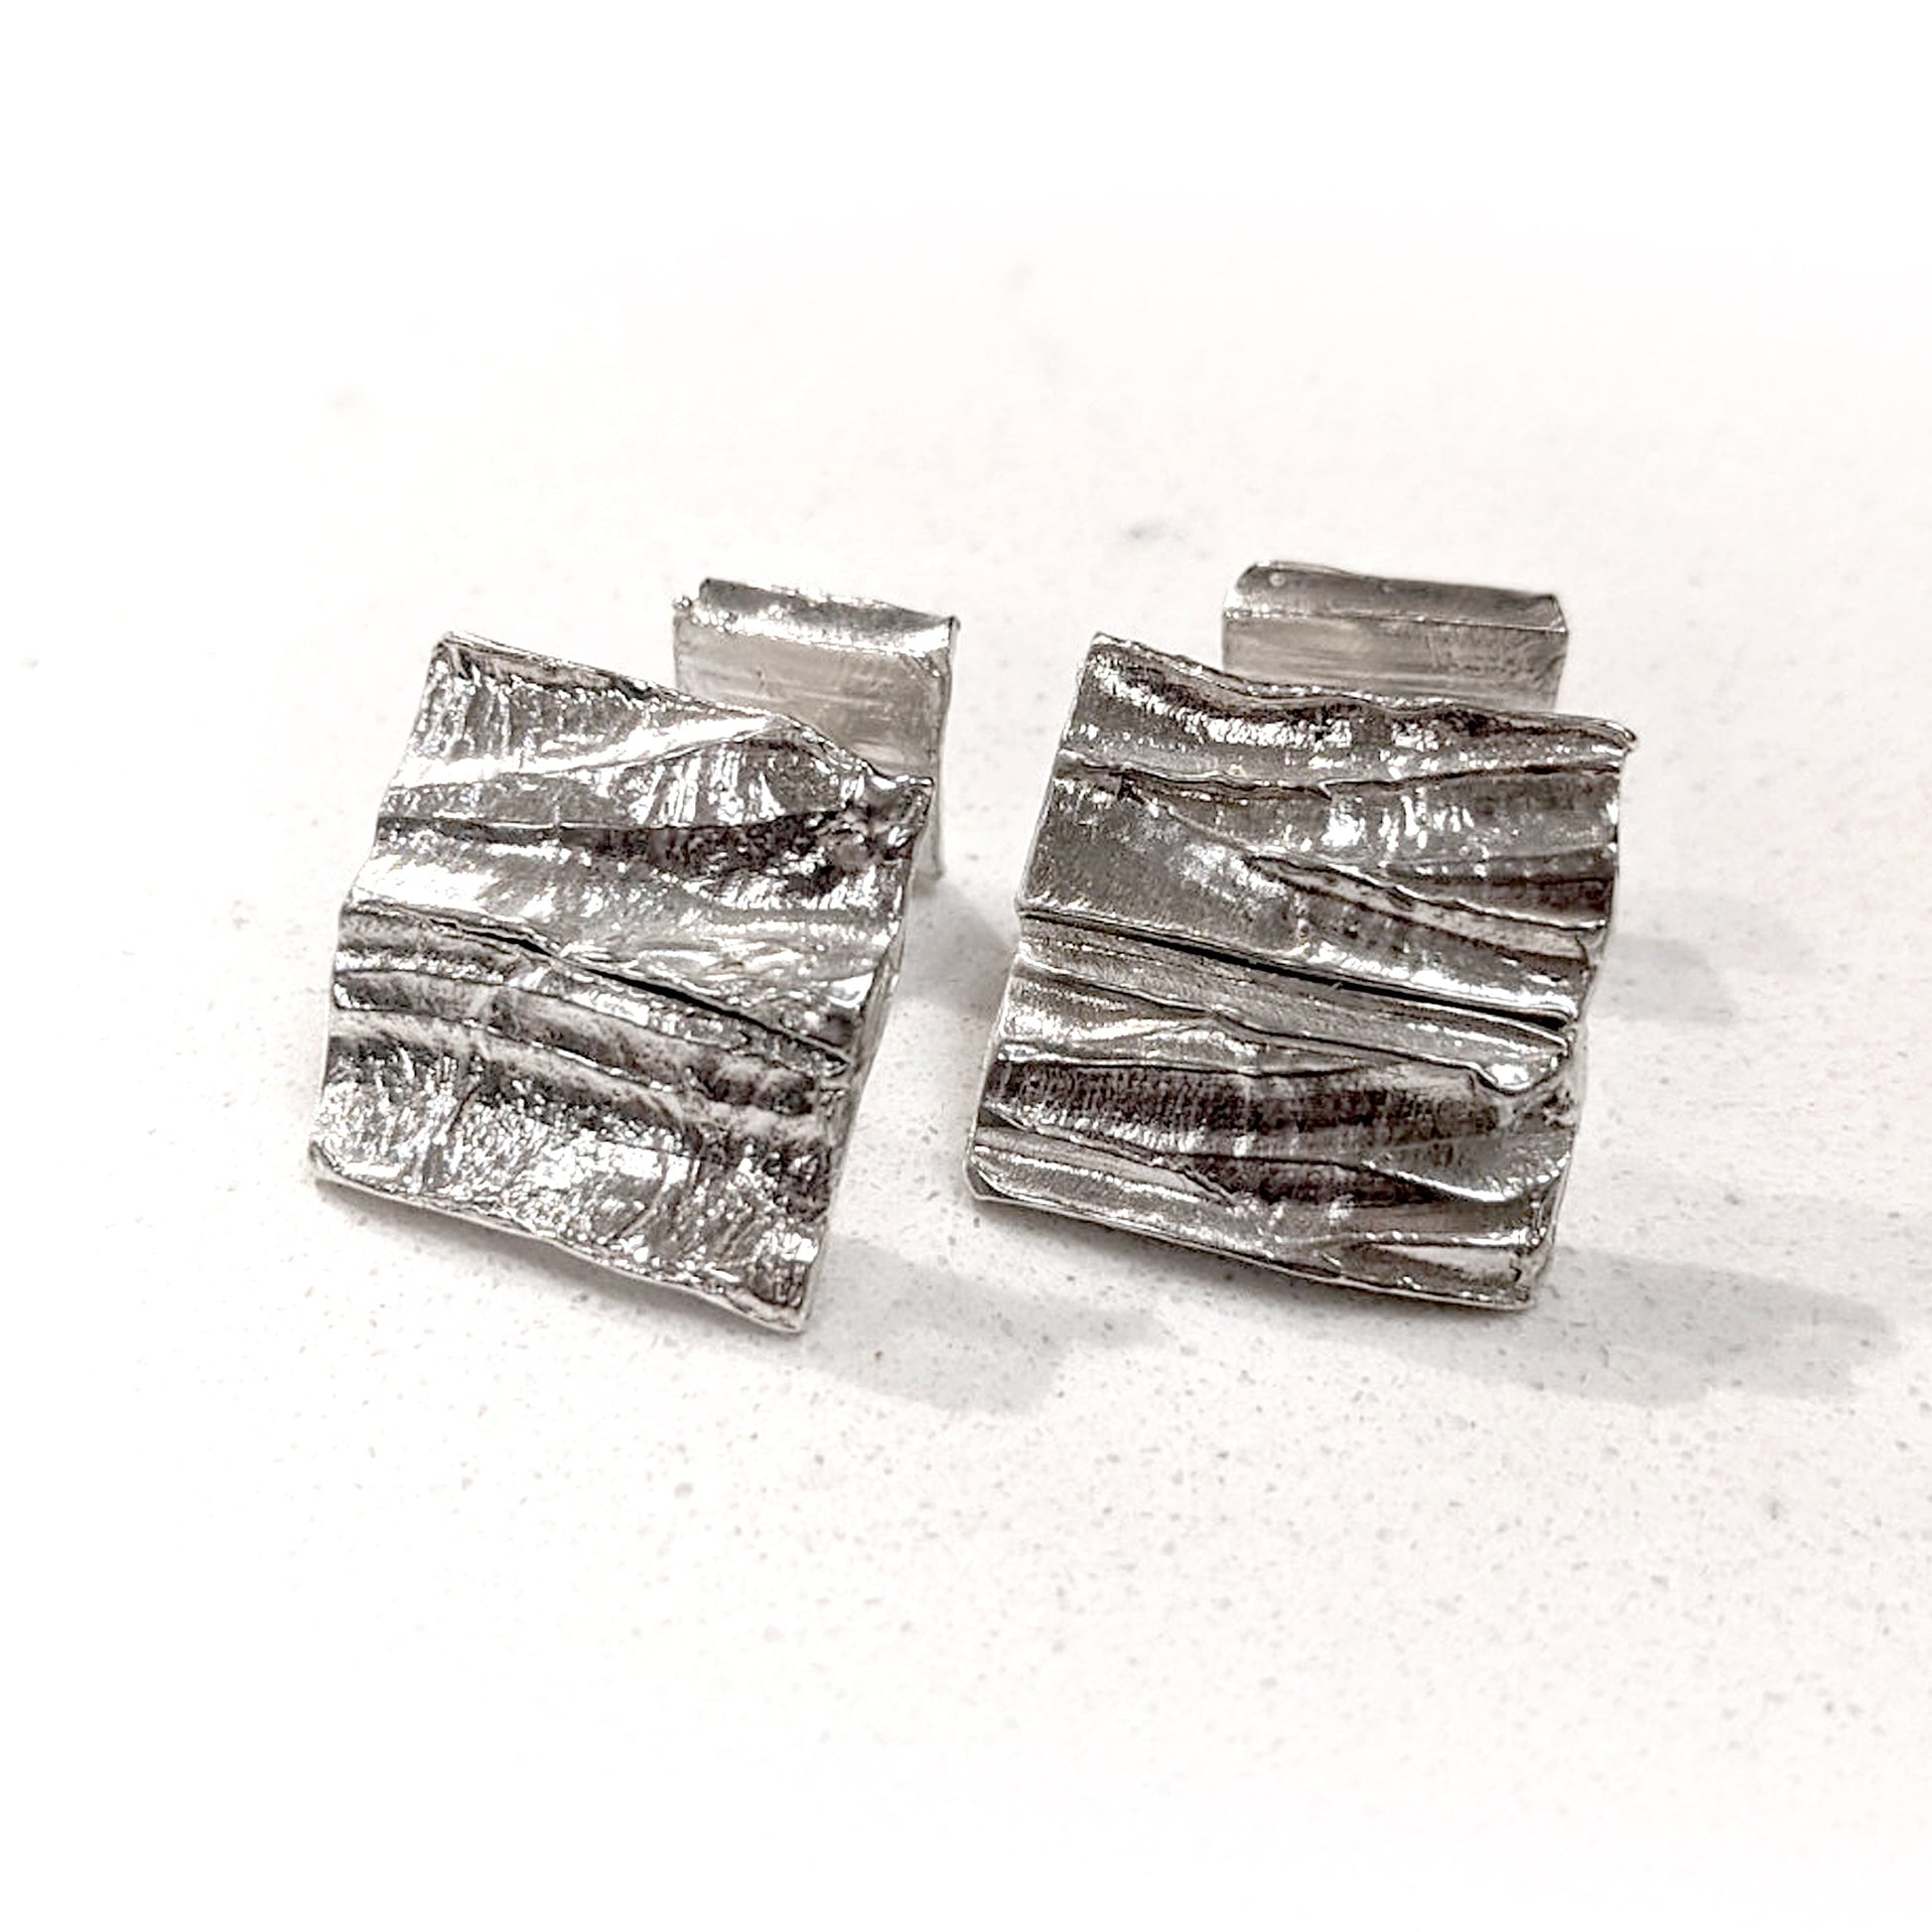 Full view of Summit Cufflinks. The Summit Cufflinks are hand carved from wax and cast in solid Sterling Silver.   Featuring a contemporary, organic ridgeline design that is reminiscent of peaks, valleys, or geographic features.